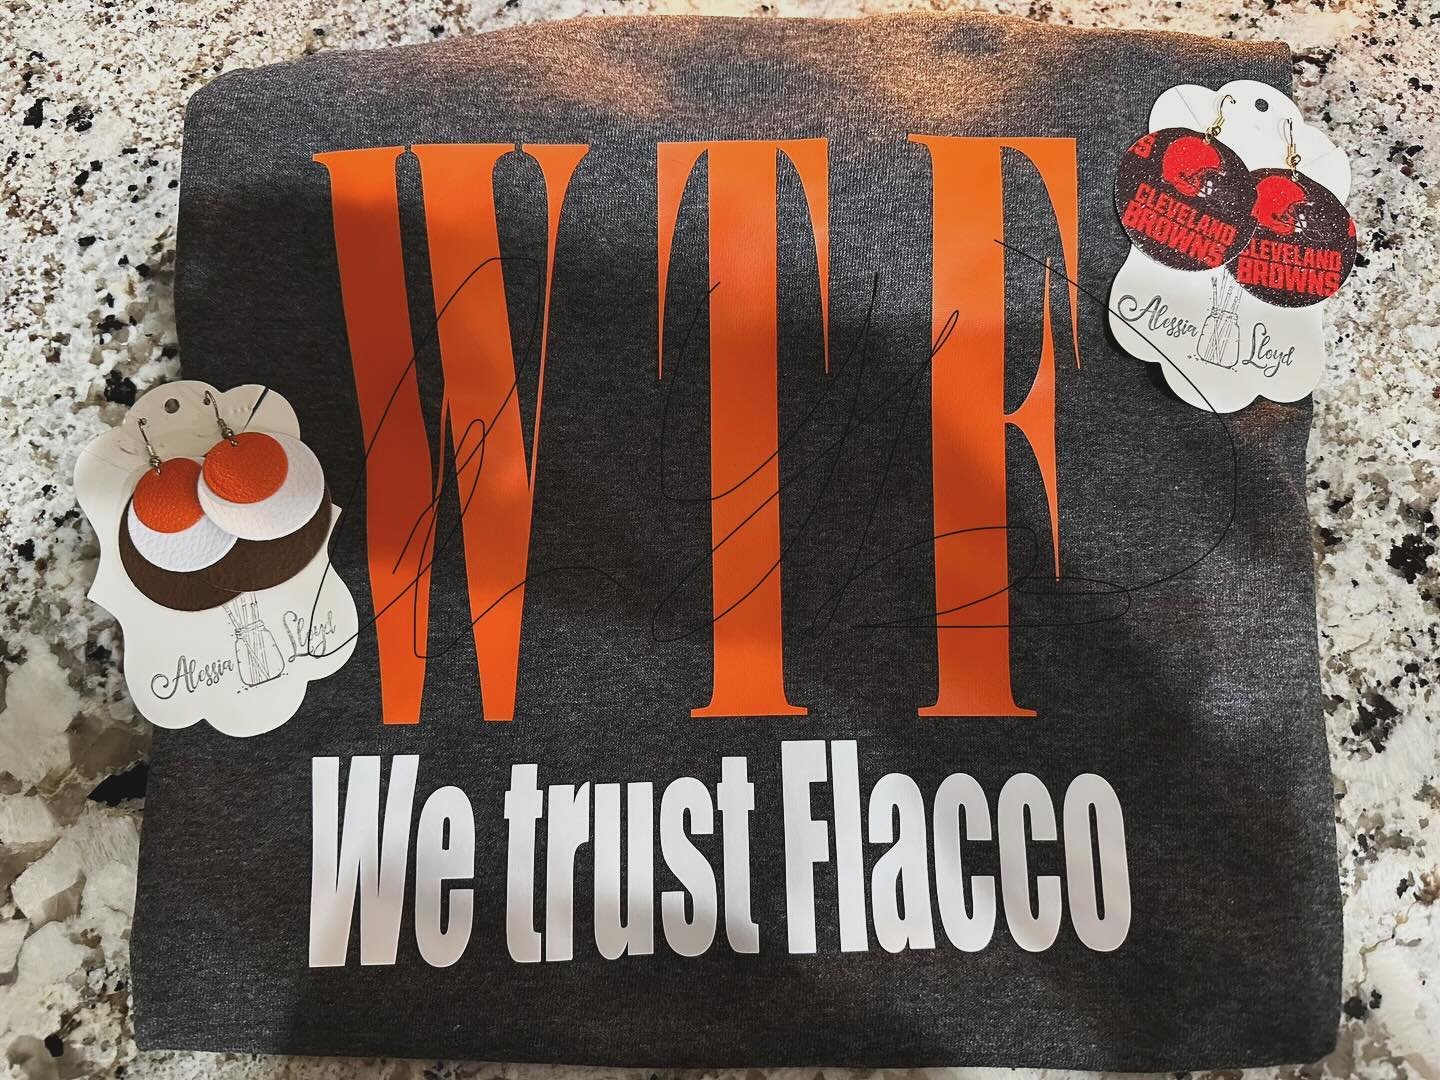 Thank you, #15, for redefining the meaning of WTF for Browns fans everywhere. There&rsquo;s always this year! #clevelandbrowns #clevelandohio #theland #cleveland #football  #joeflacco #smallbusiness #shoplocal #shopsmall #smallbusiness #orangeandbrow